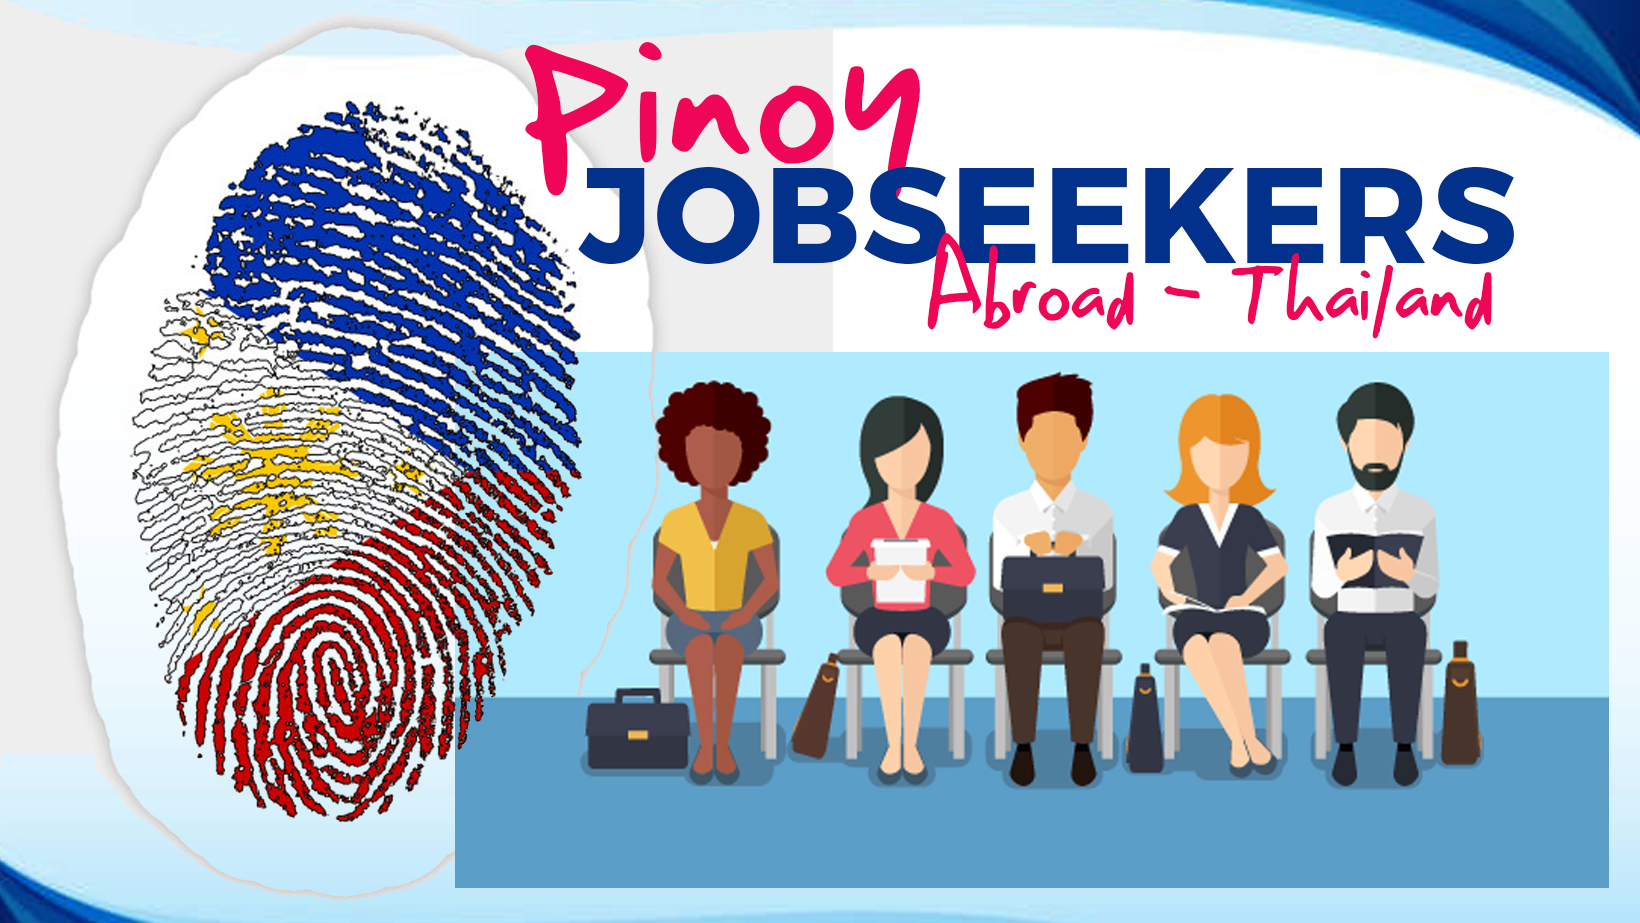 Pinoy Jobseekers Abroad Thailand